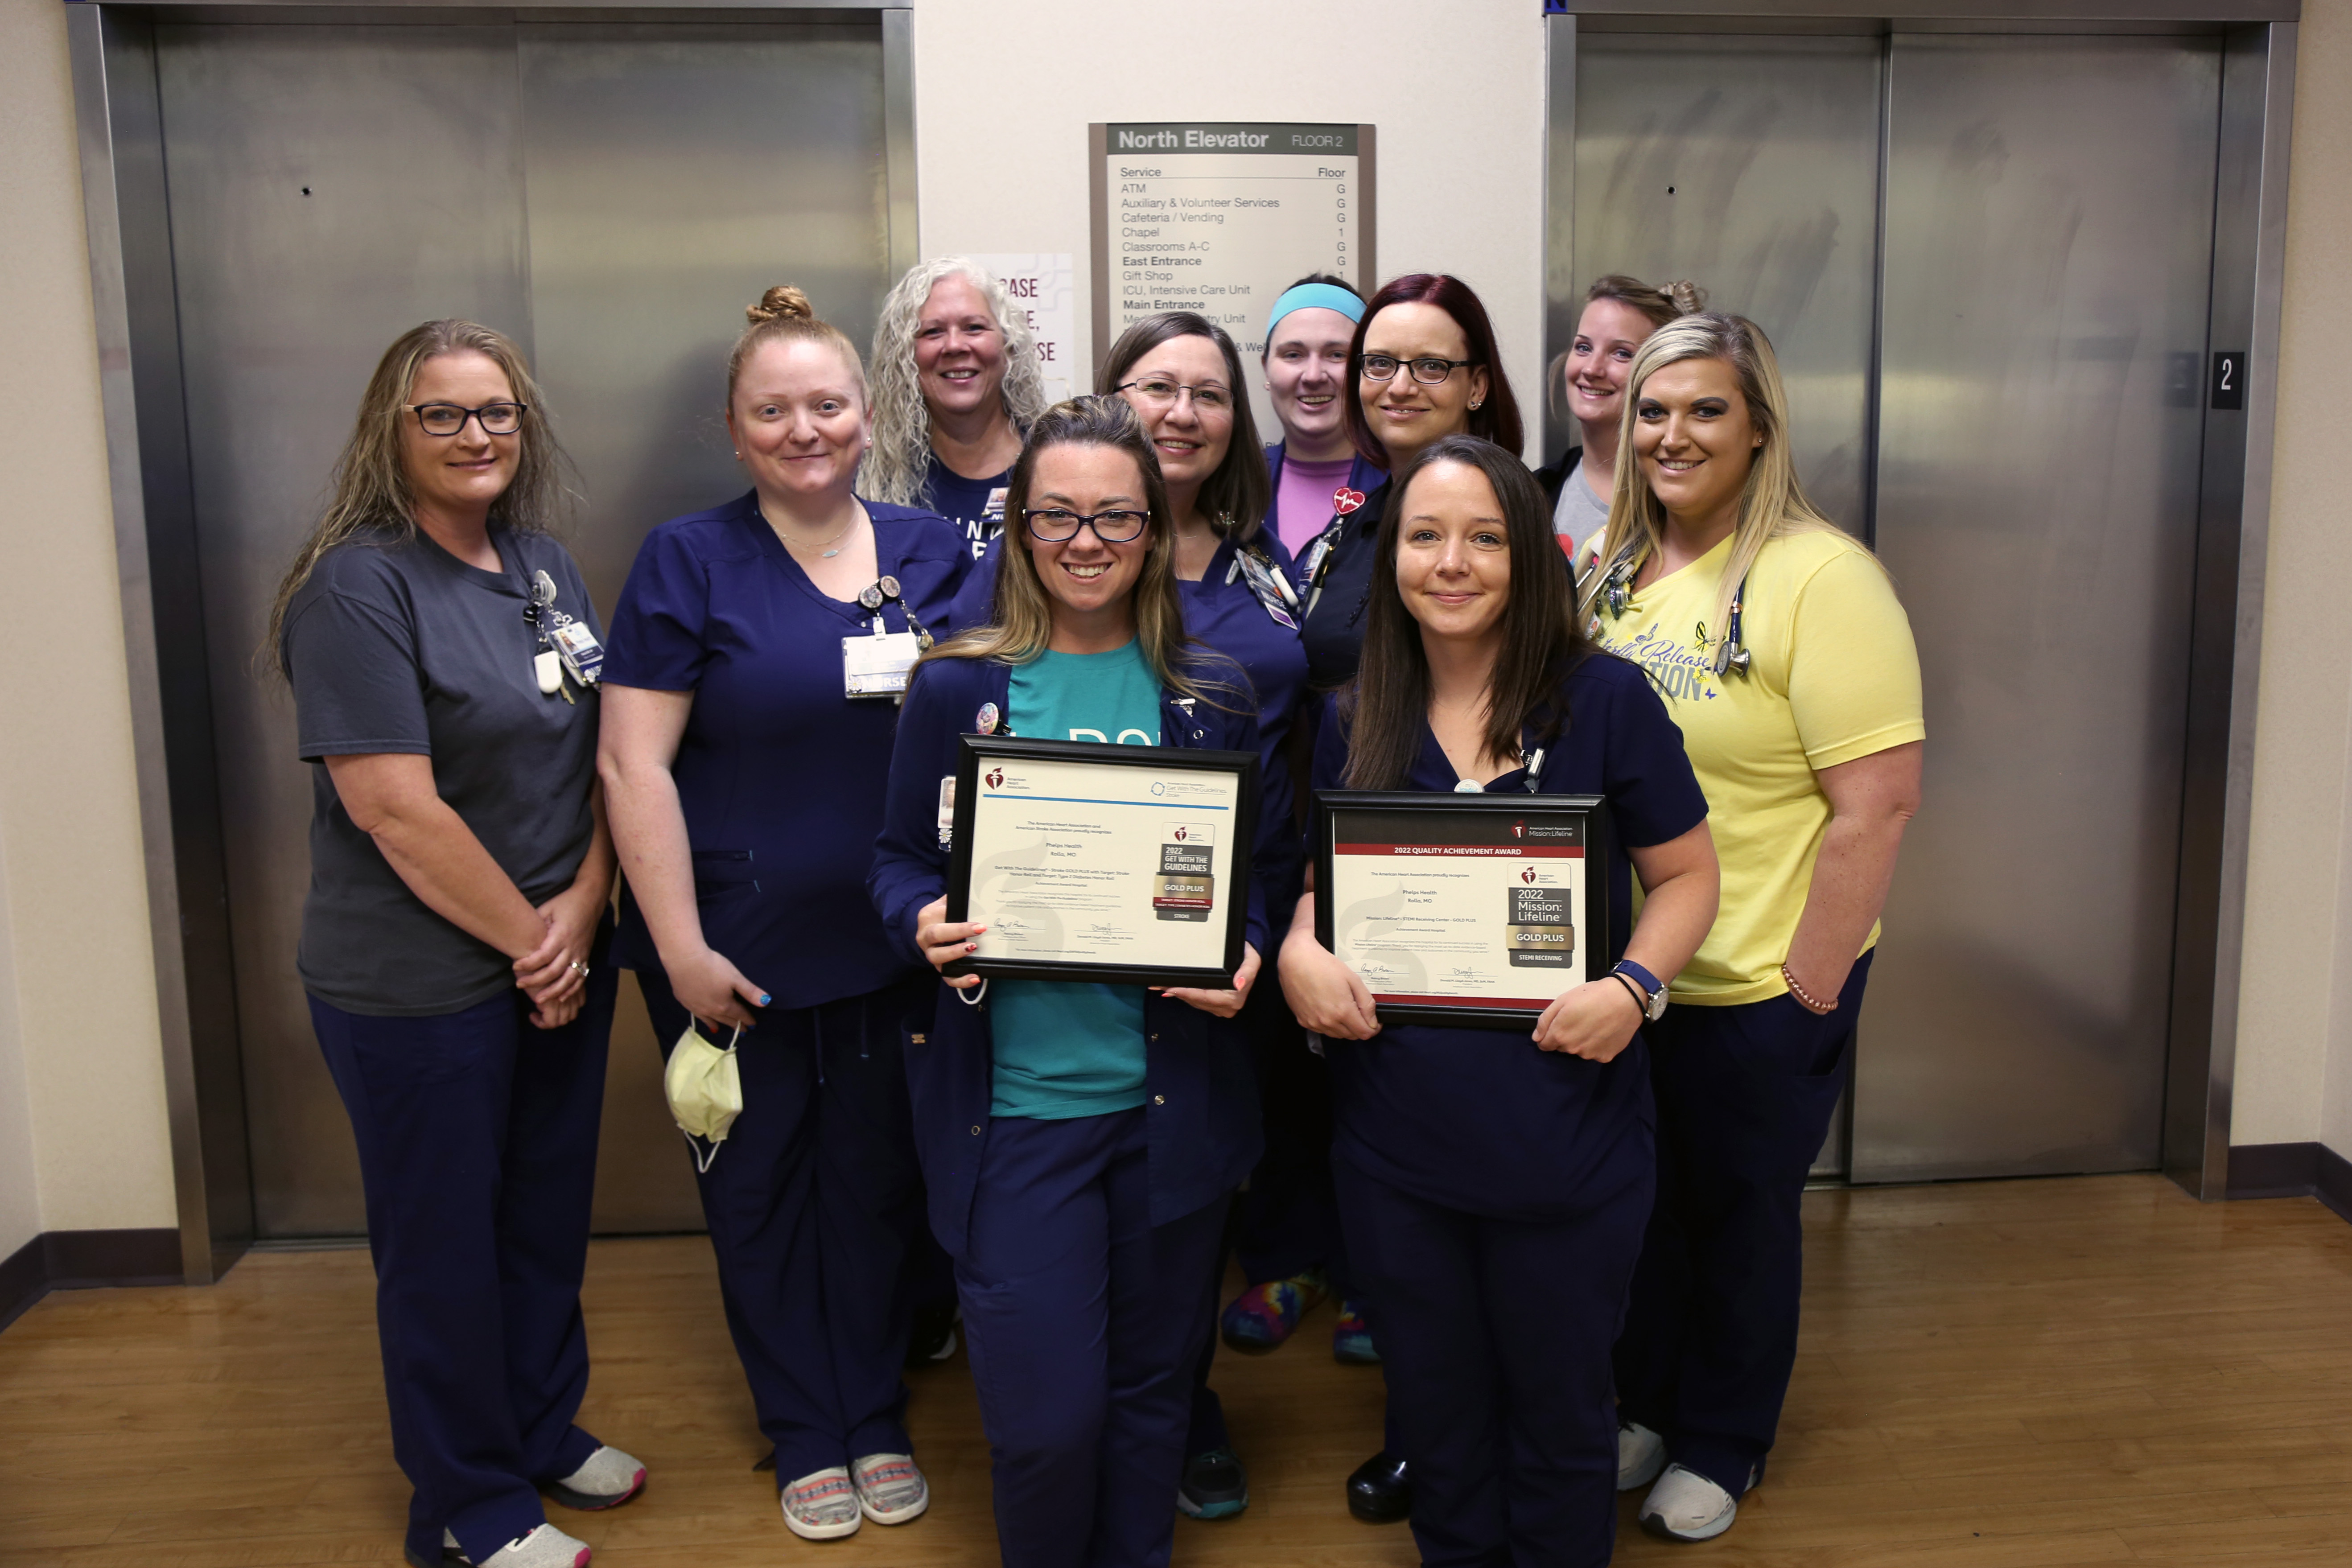 Acute Medical Services/Telemetry staff with American Heart Association awards